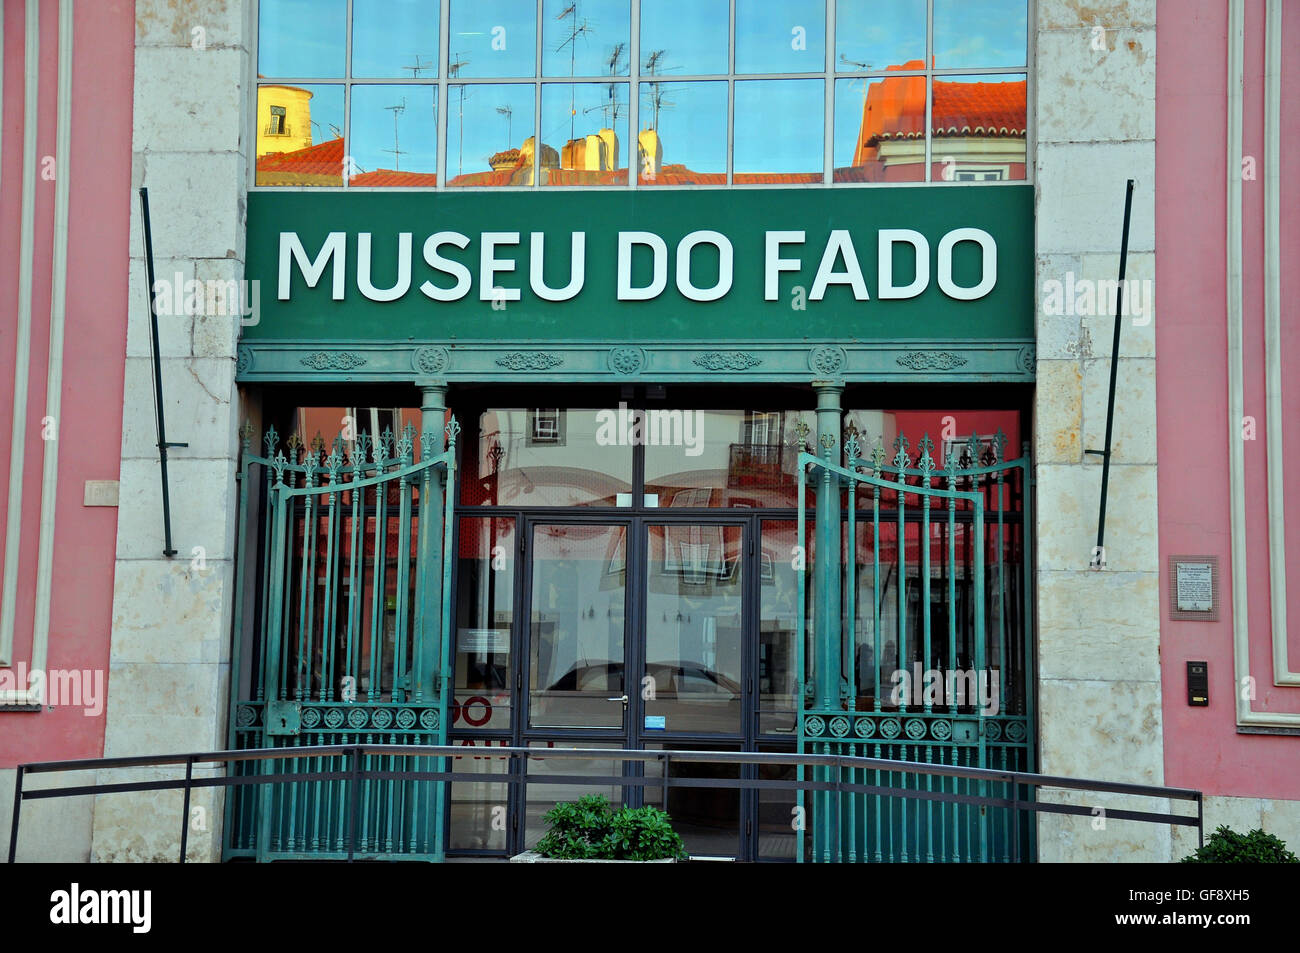 LISBON, PORTUGAL - DECEMBER 21: Facade of Fado museum building in Lisbon on december 21, 2013. Lisbon is a capital and the large Stock Photo